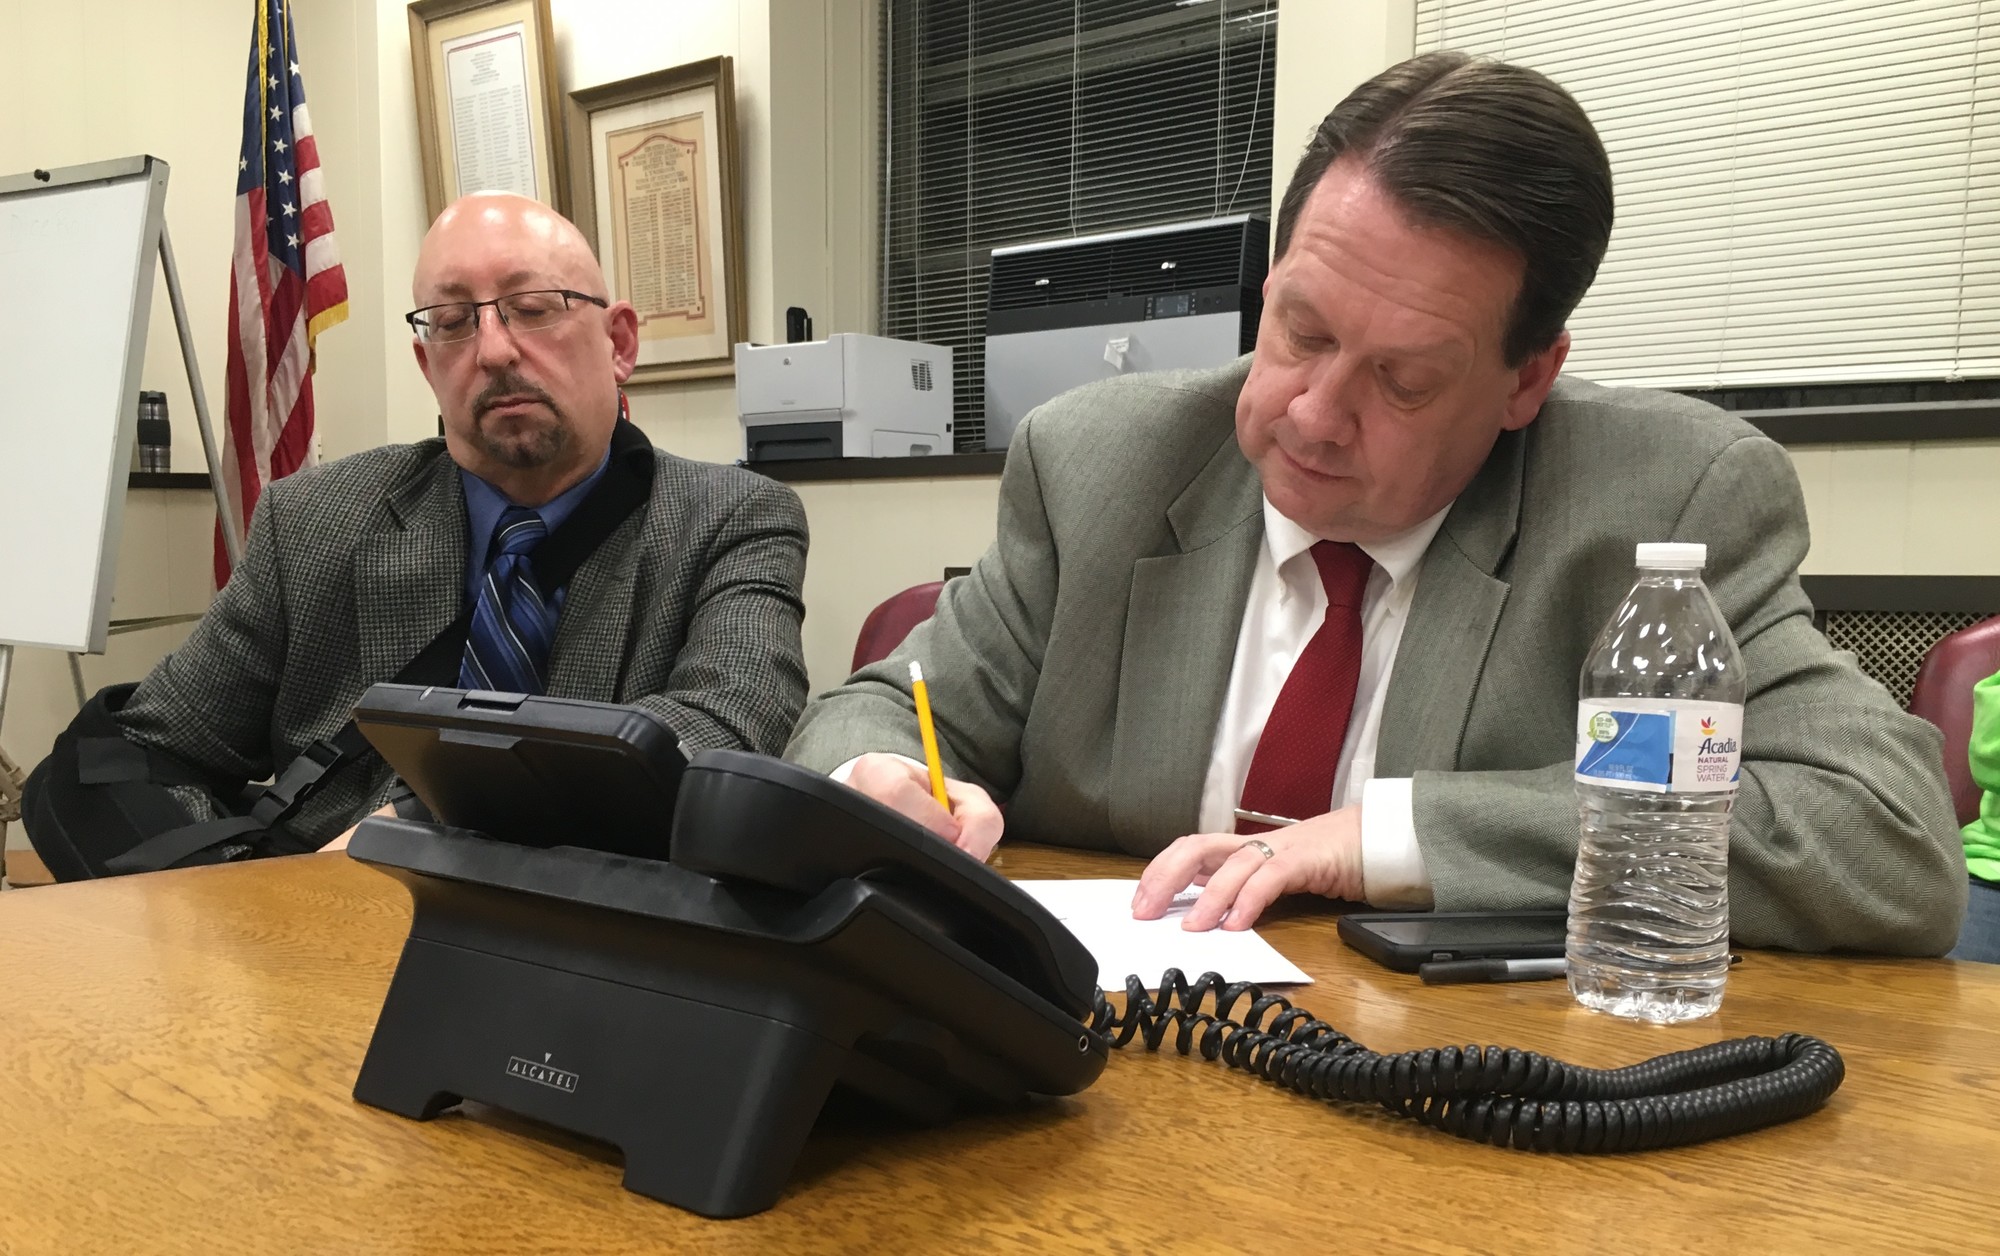 Paul Lynch, right, Lynbrook’s school district assistant superintendent for finance, operations and information systems, waited for the results on Tuesday night. With him was Joseph Pallotta, director of fine and performing arts for the district.